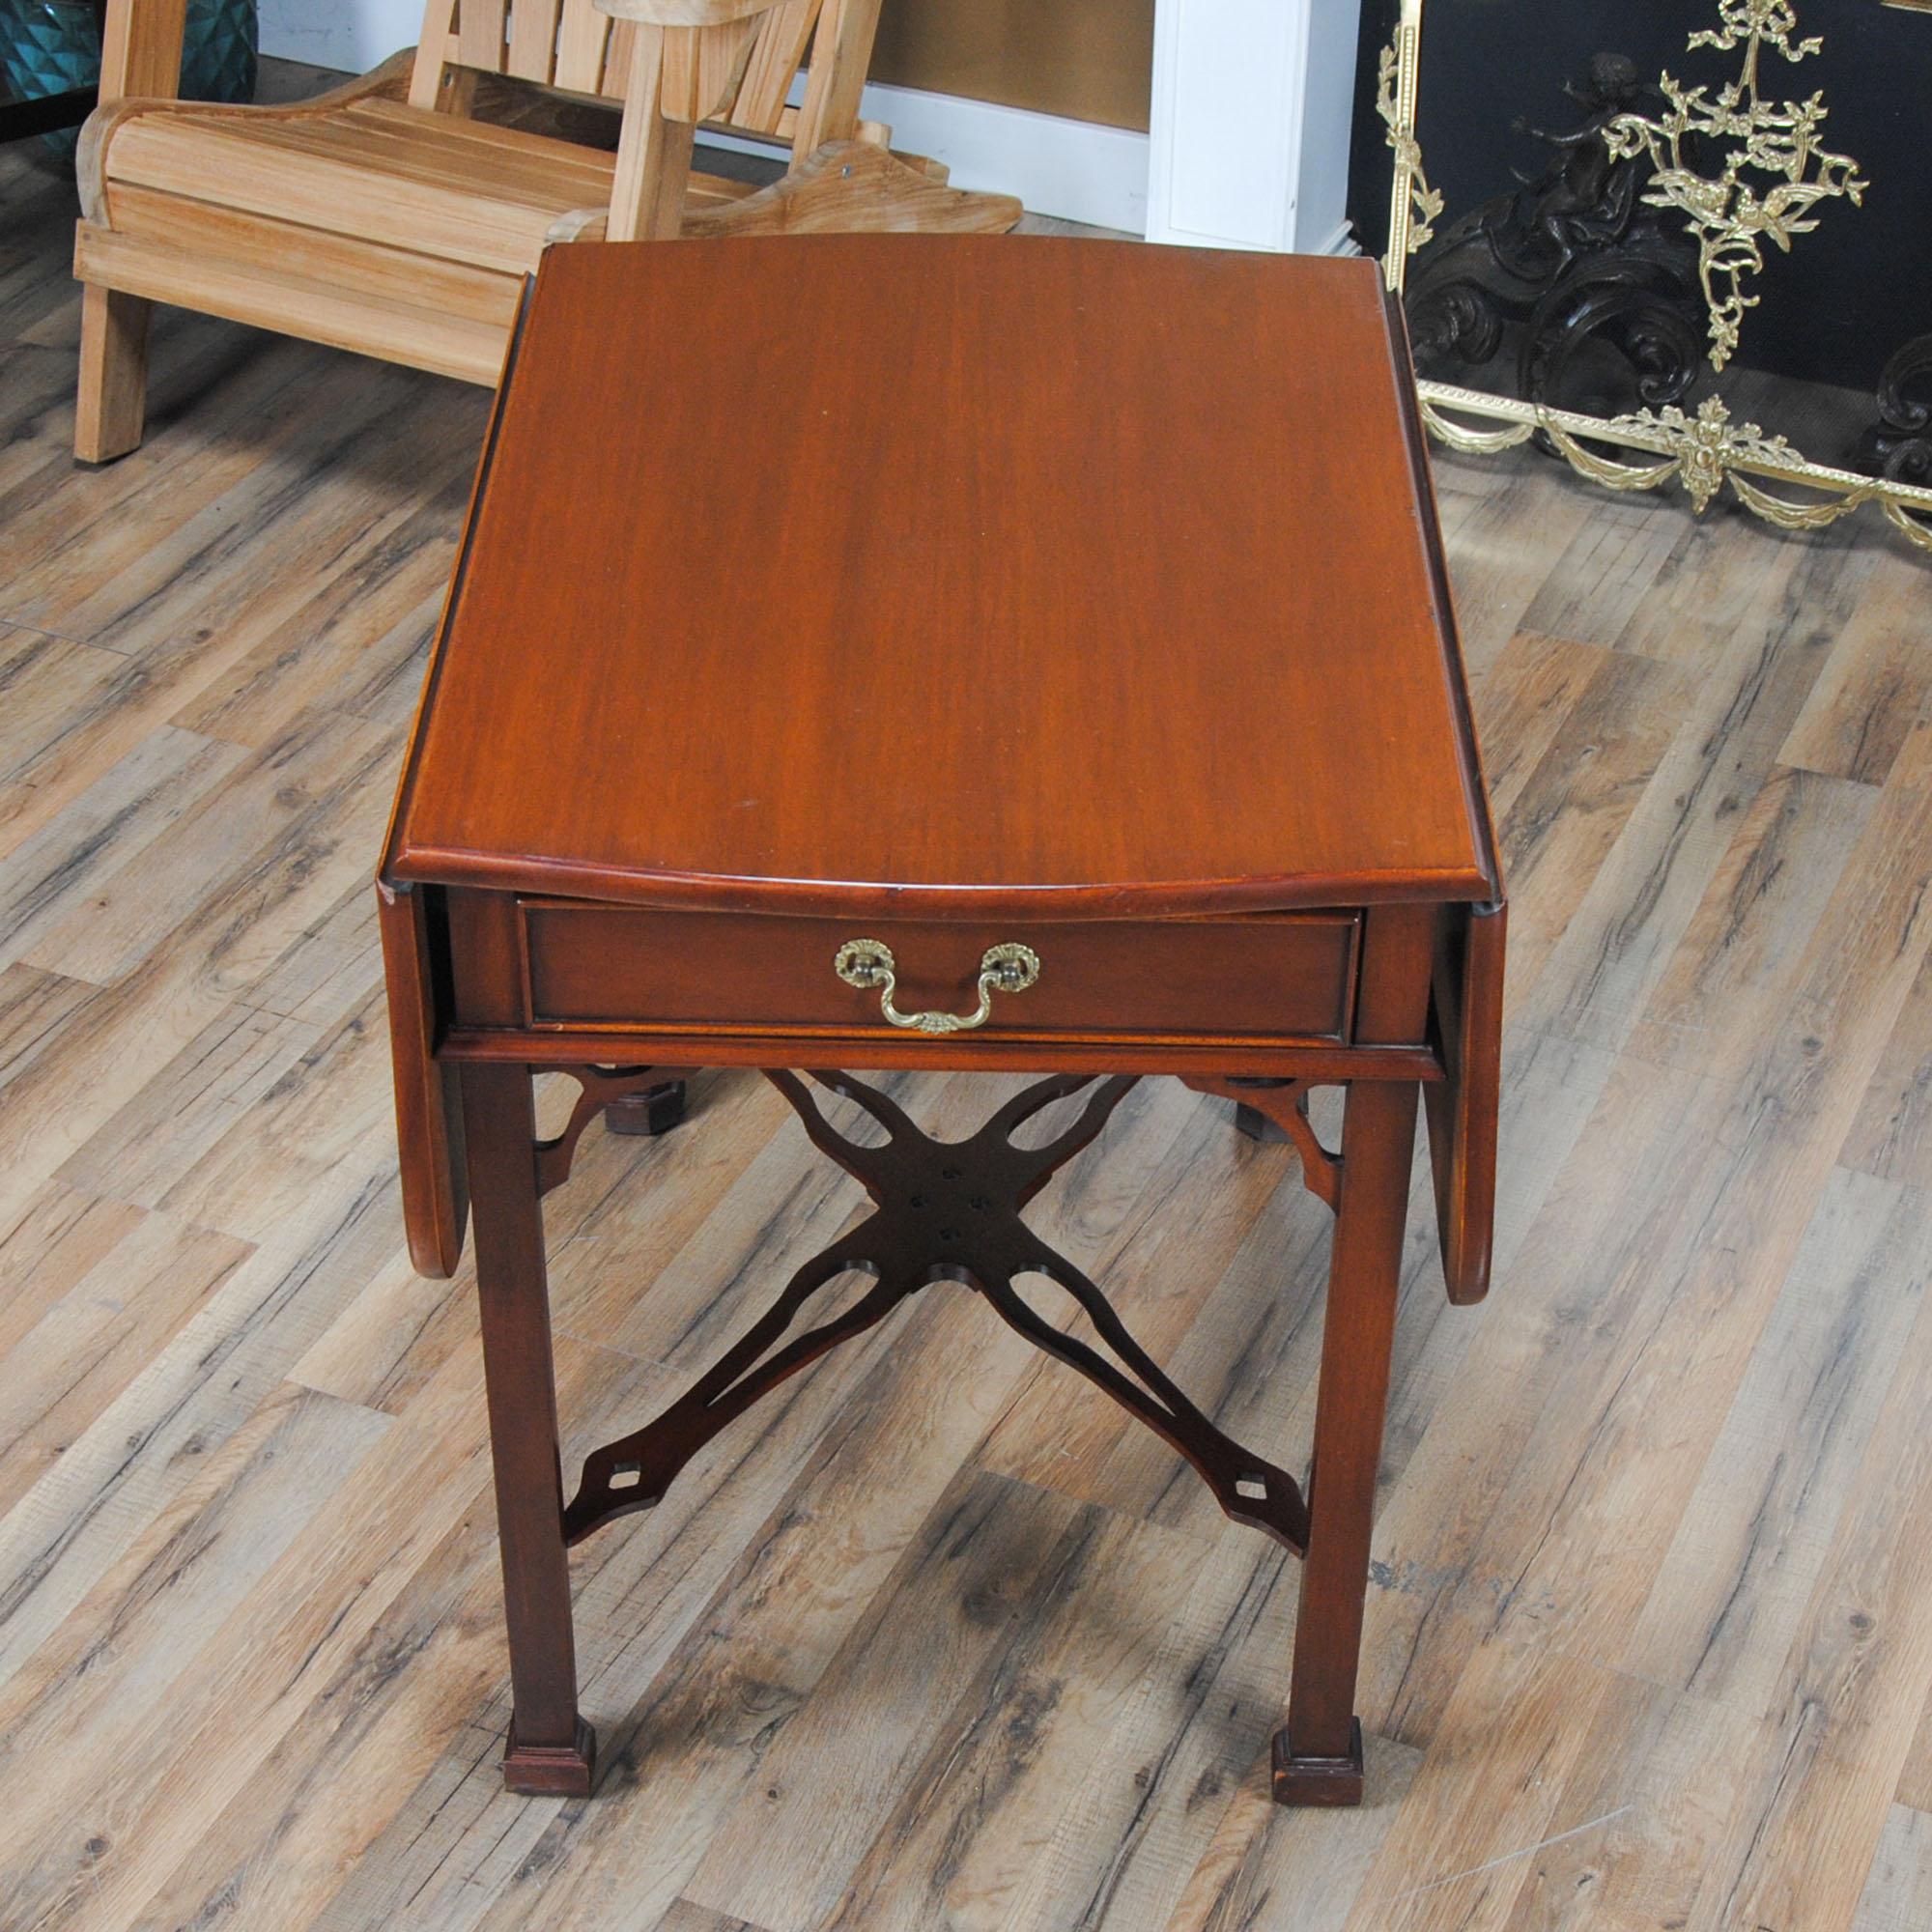 This beautiful Southampton Dropside Table will be recognizable to anyone familiar with fine antique furniture. Originally designed by Henry Herbert, 9th Earl of Pembroke, this form of table was made popular by various furniture designers in 18th